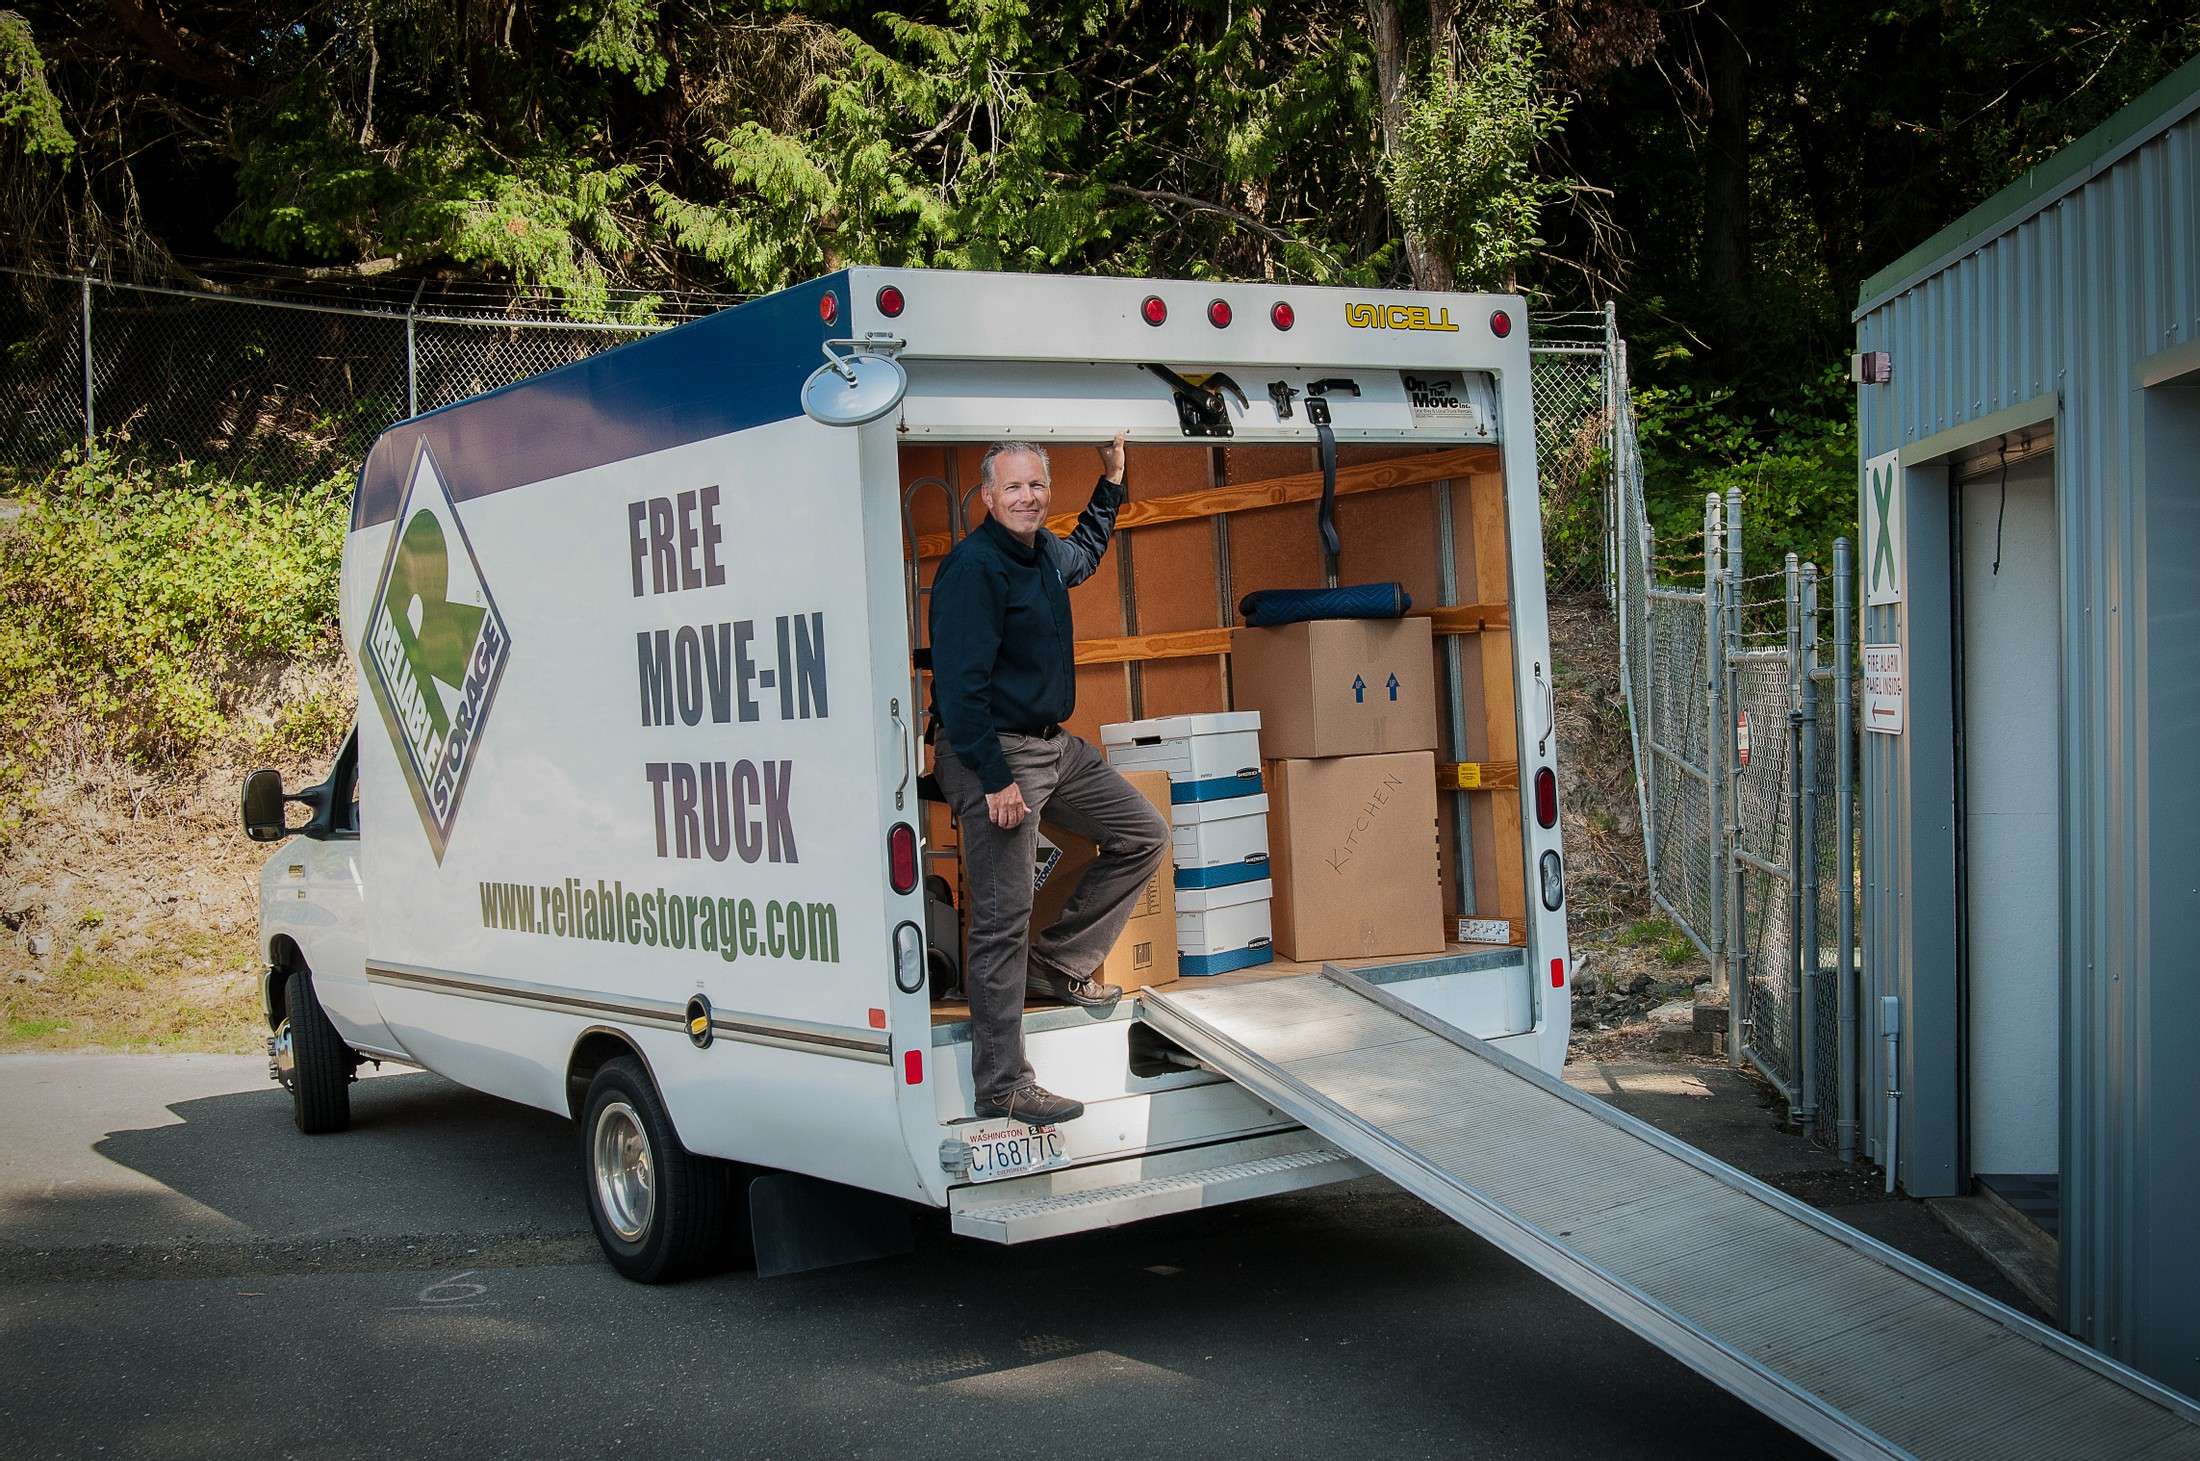 Reliable Storage Unloading Free Move-In Truck